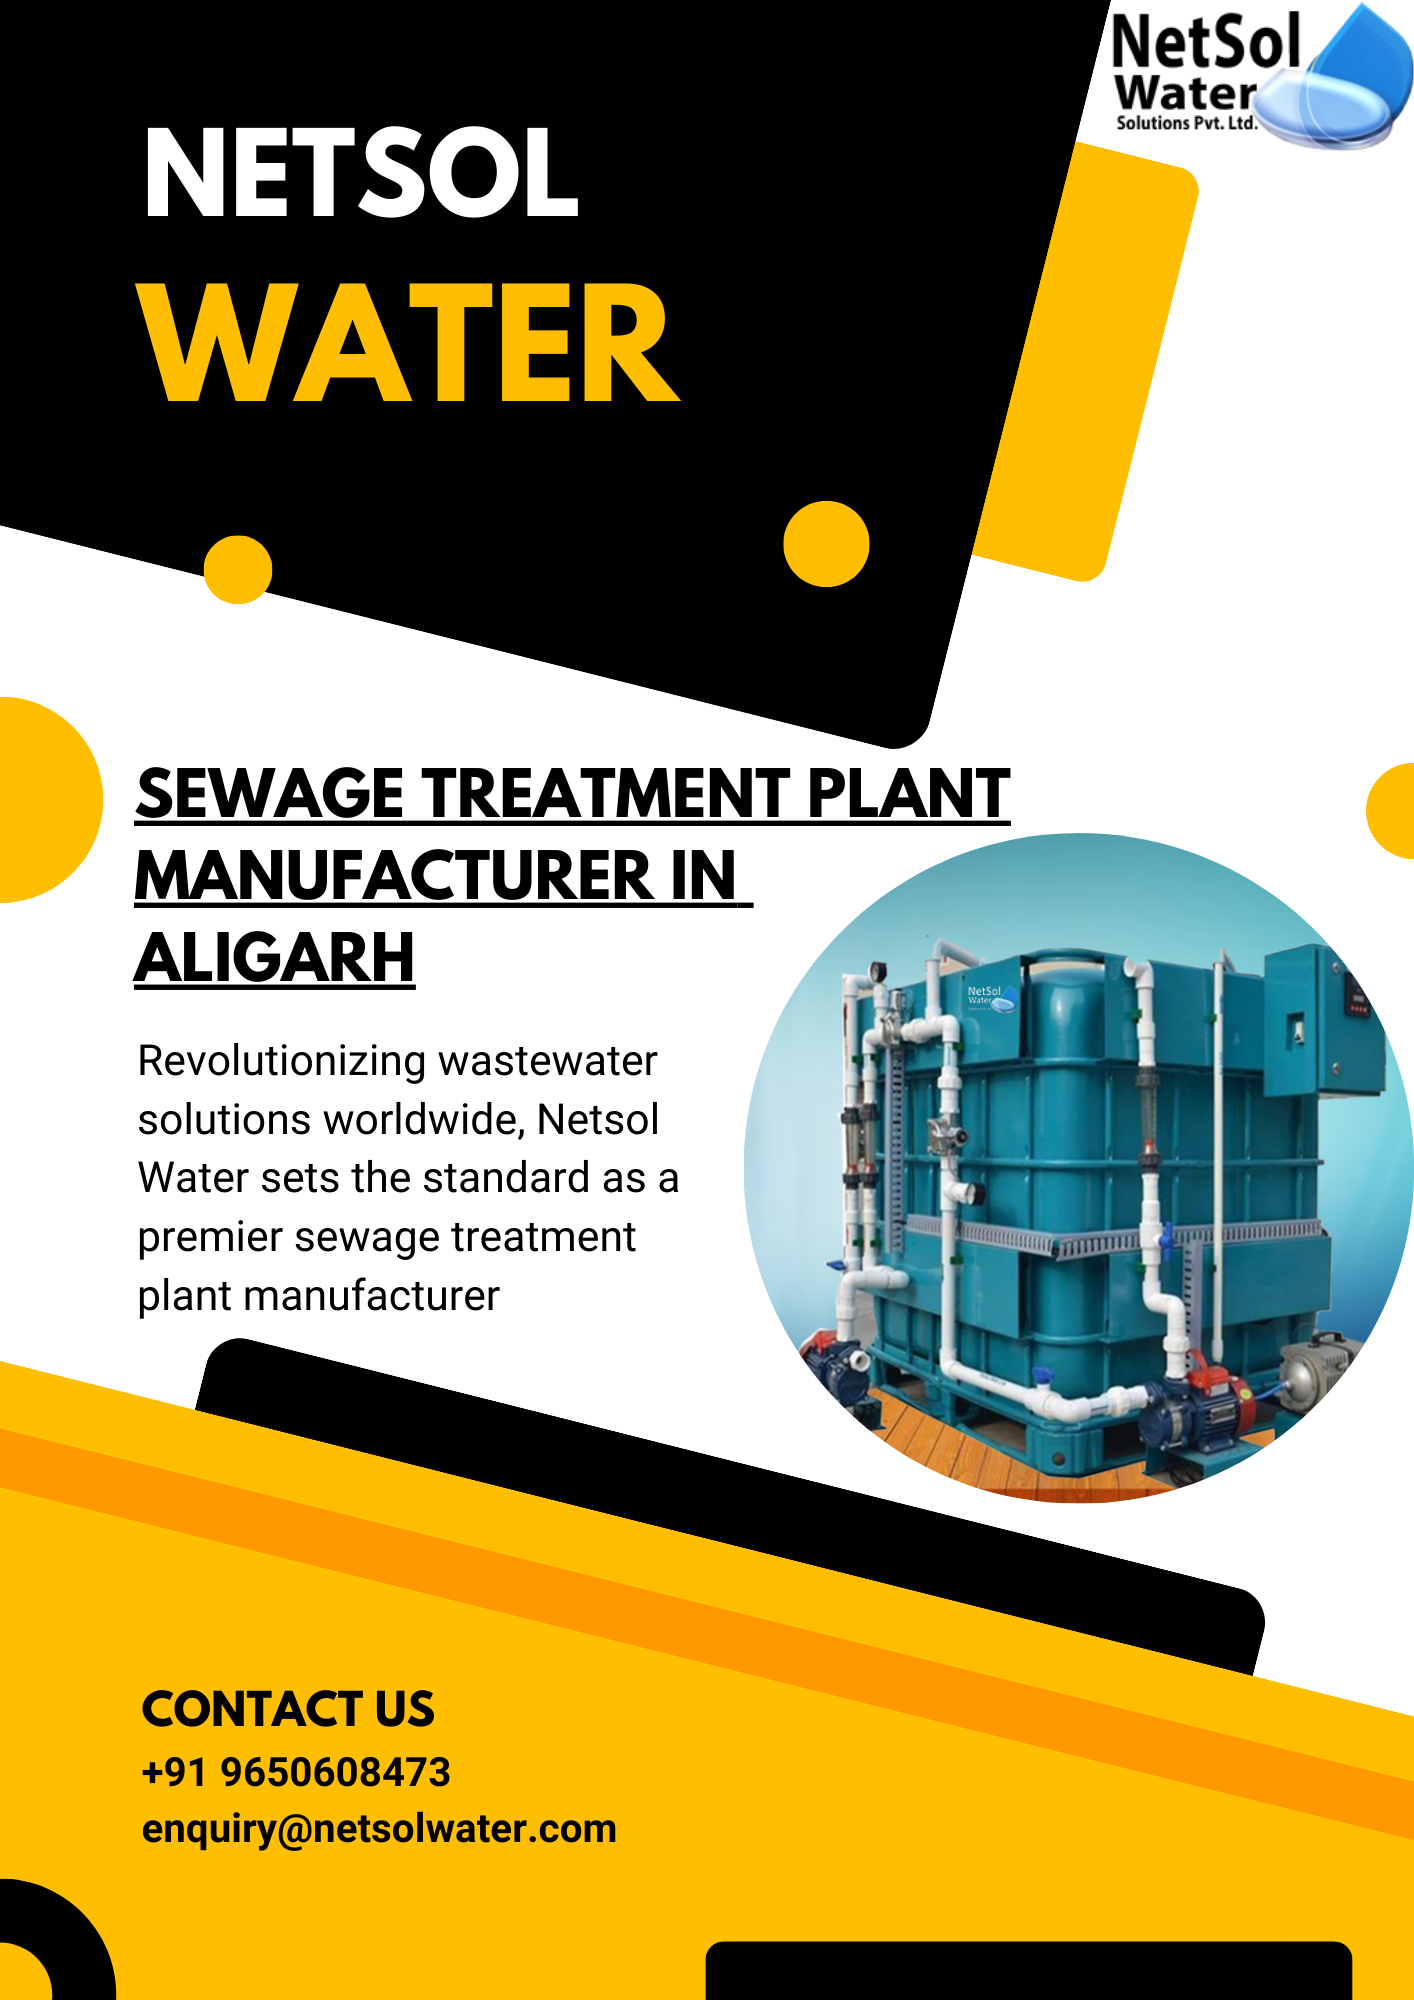 Discover unparalleled sewage treatment solutions in Aligarh with Netsol Water. As a premier manufacturer, Netsol Water combines advanced technol...